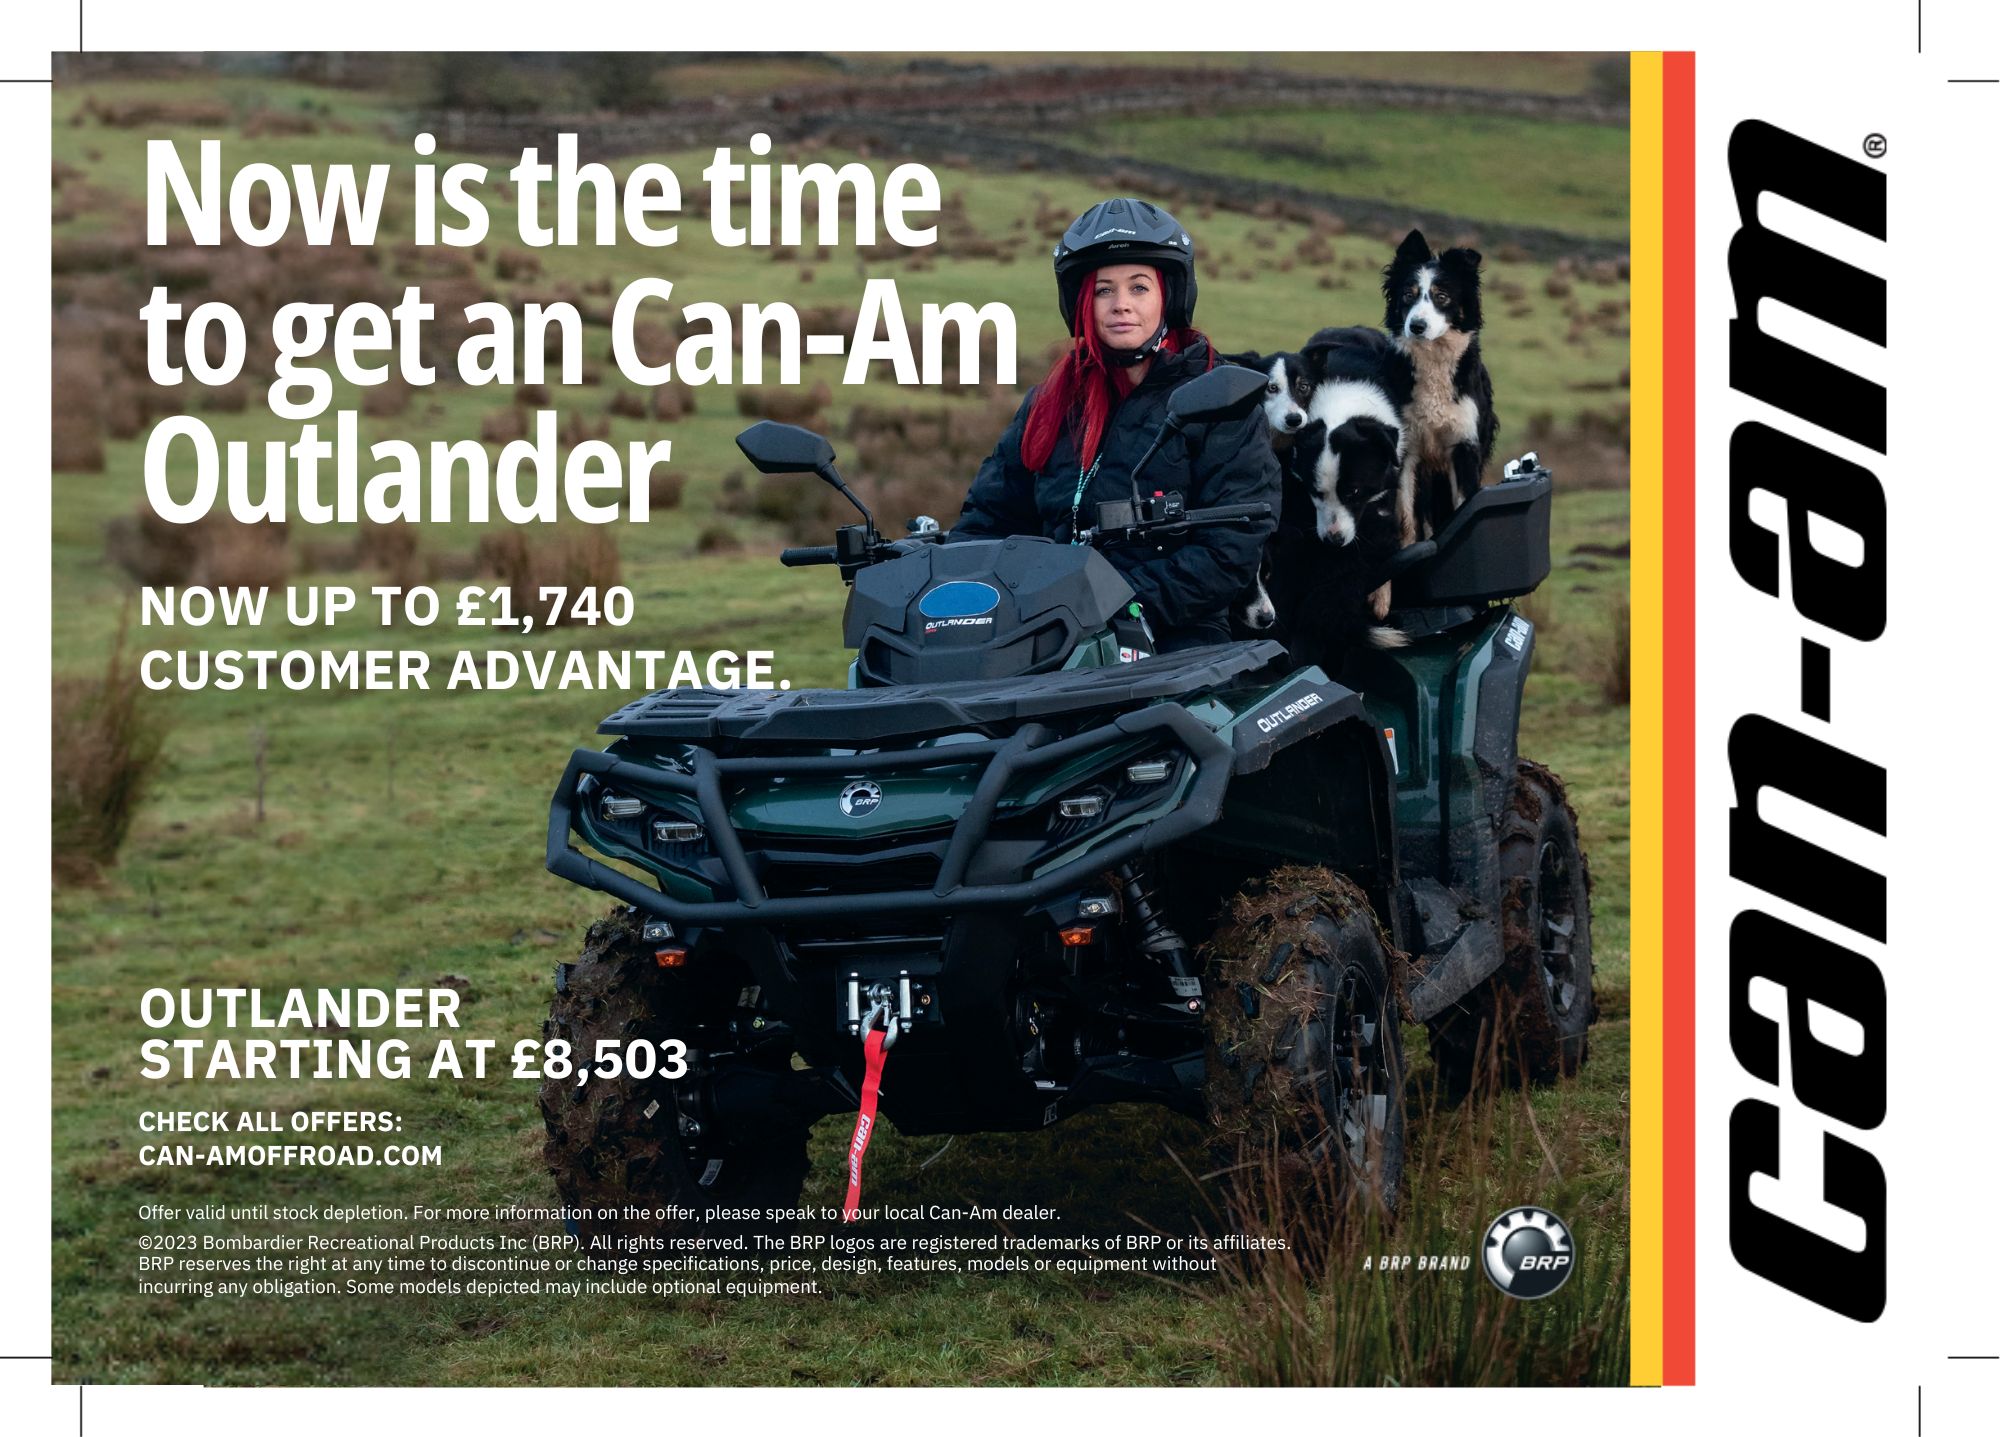 Can-am latest Outlander offer